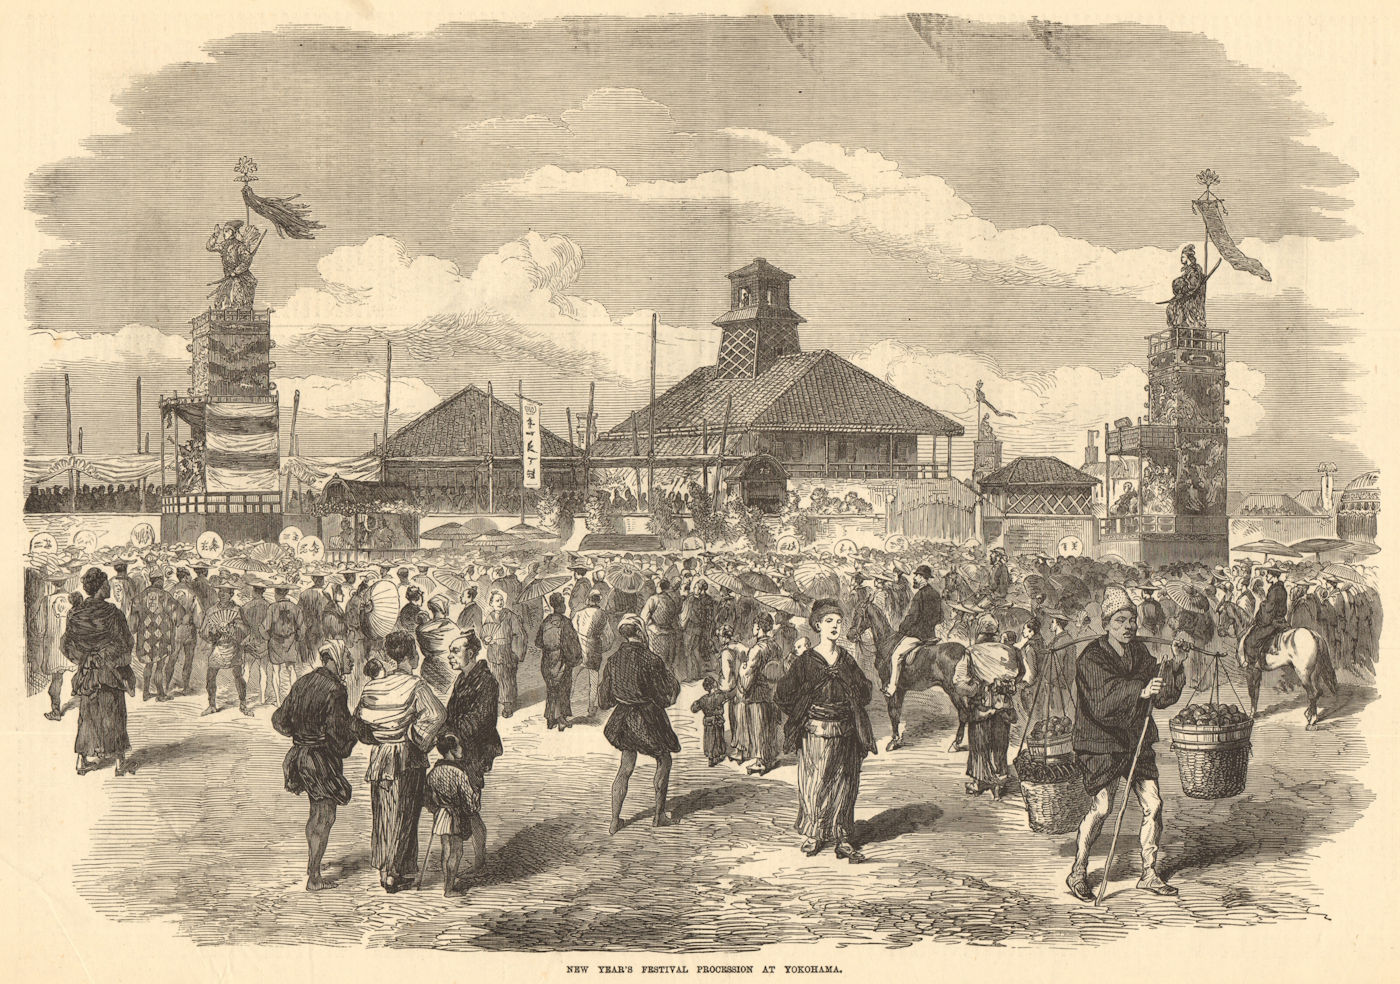 Associate Product New year's festival procession at Yokohama 1872 antique ILN full page print